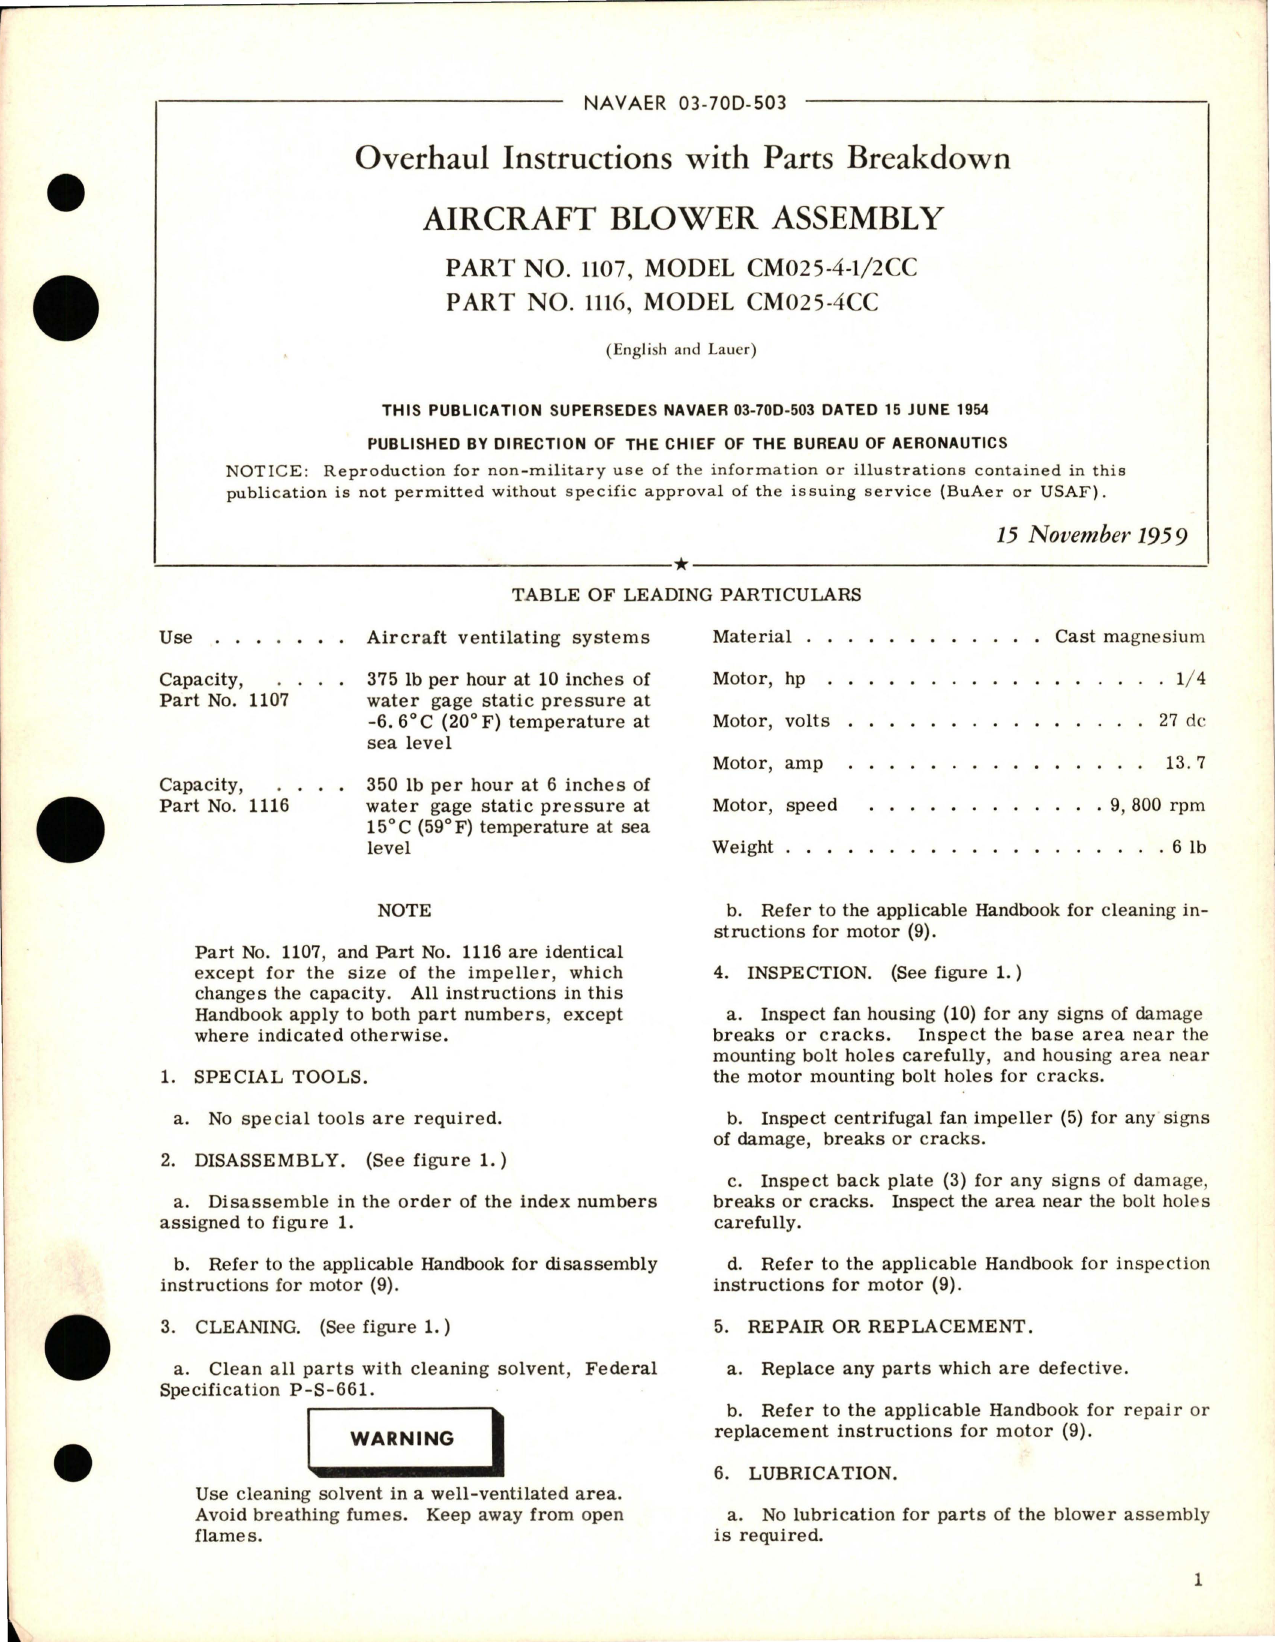 Sample page 1 from AirCorps Library document: Overhaul Instructions with Parts Breakdown for Aircraft Blower Assembly - Parts 1107 and 1116